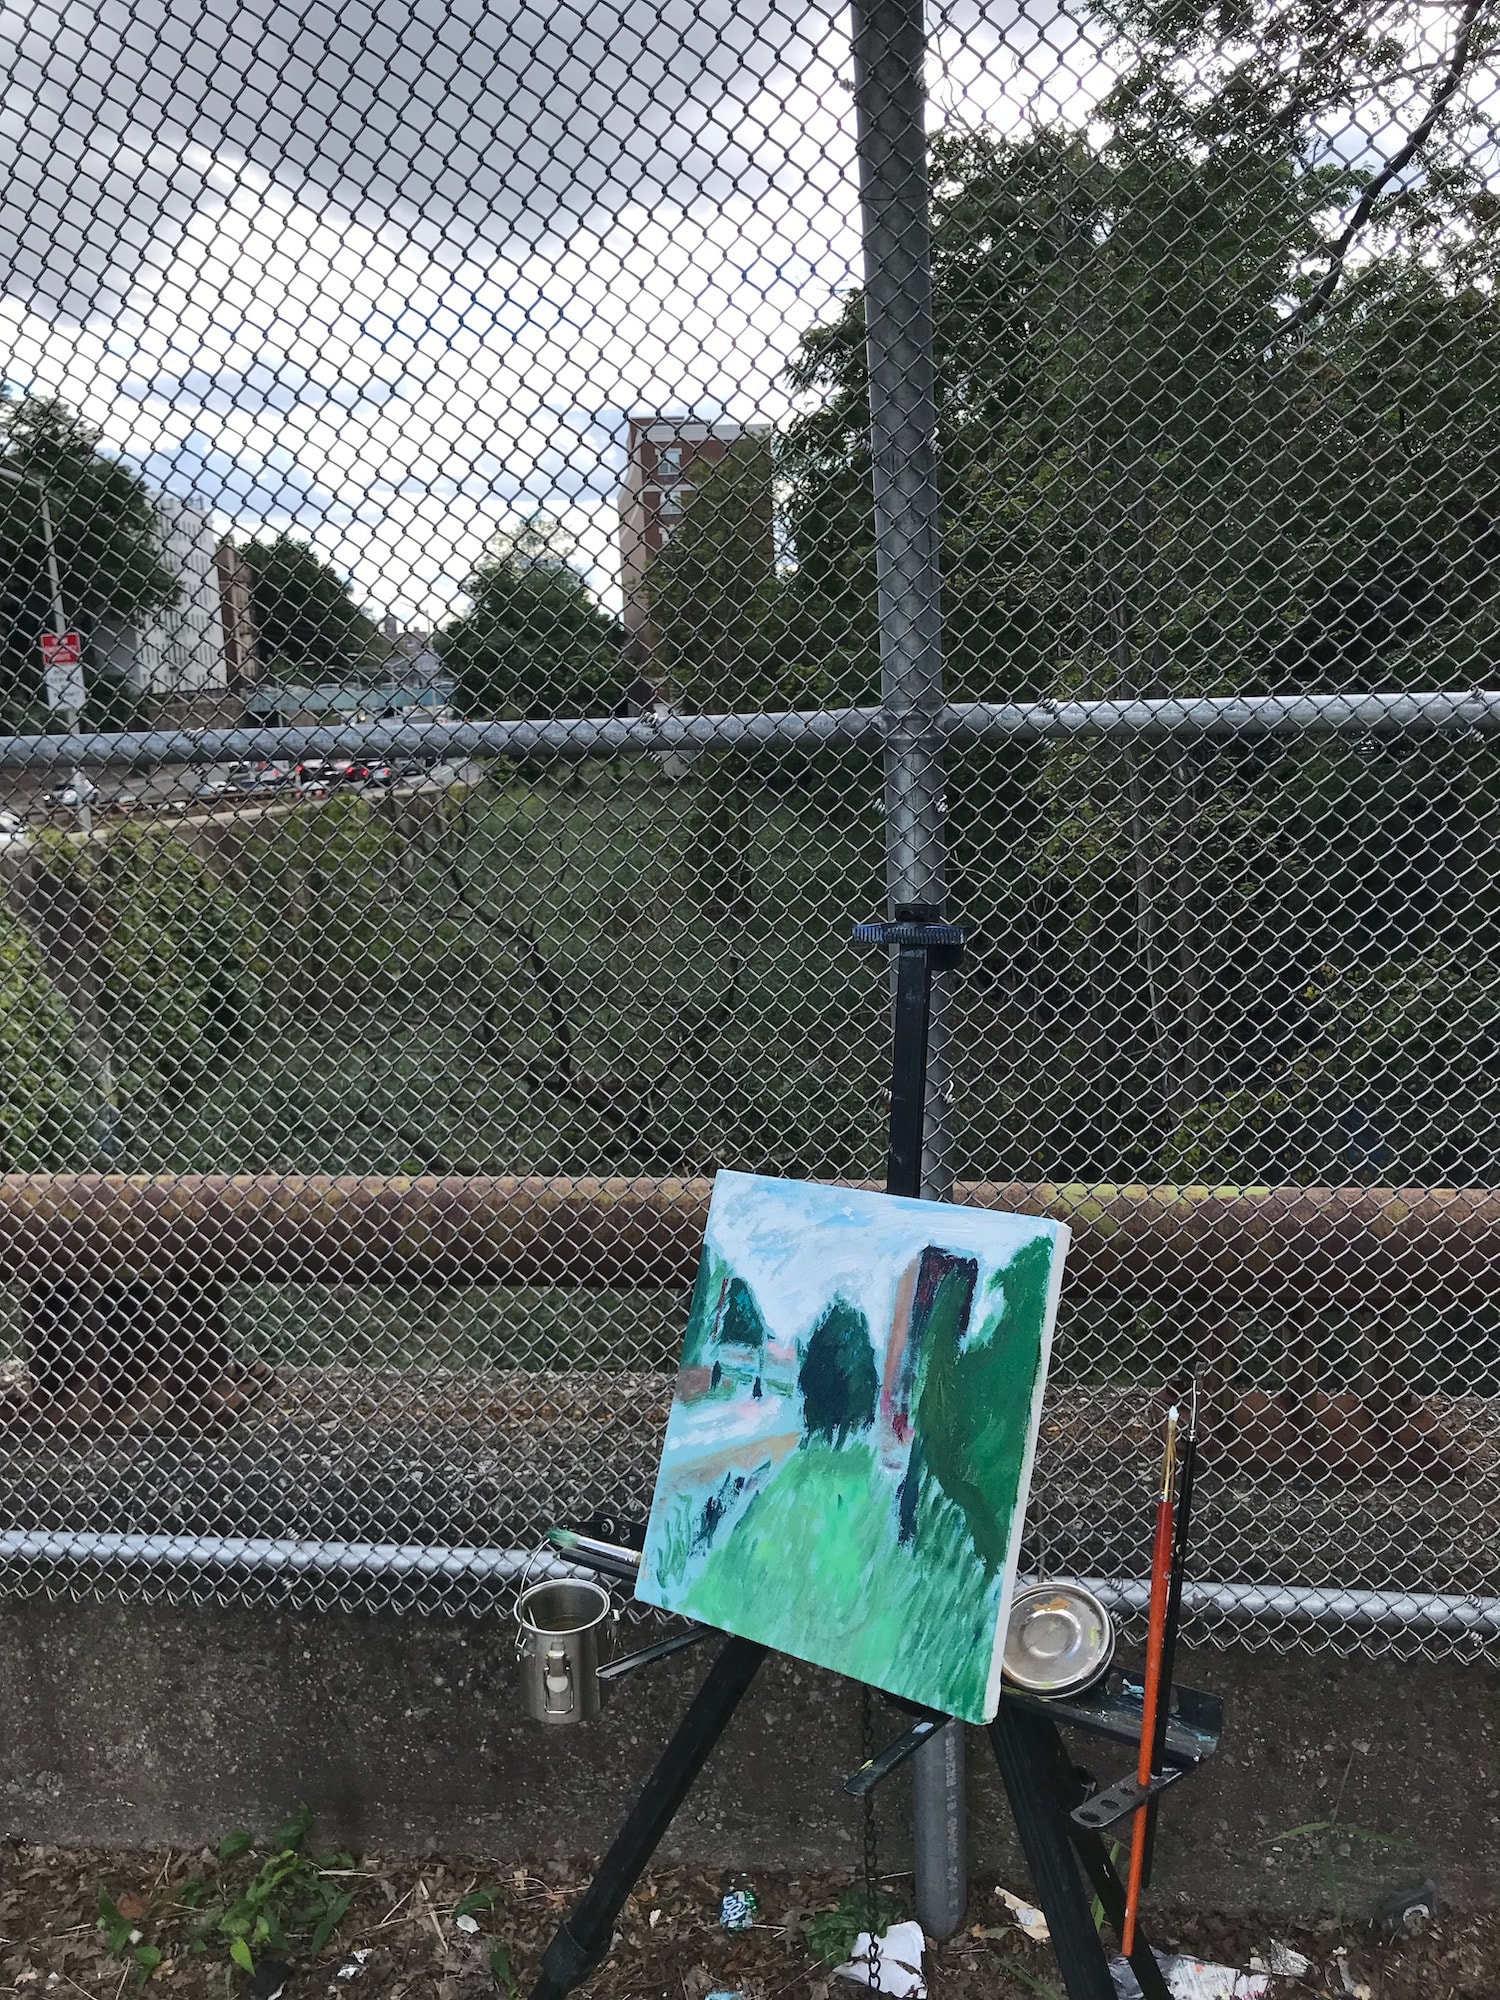 An unfinished canvas on an easel in front of a chain link fence overlooking the Tibbetts Brook area in the Bronx.